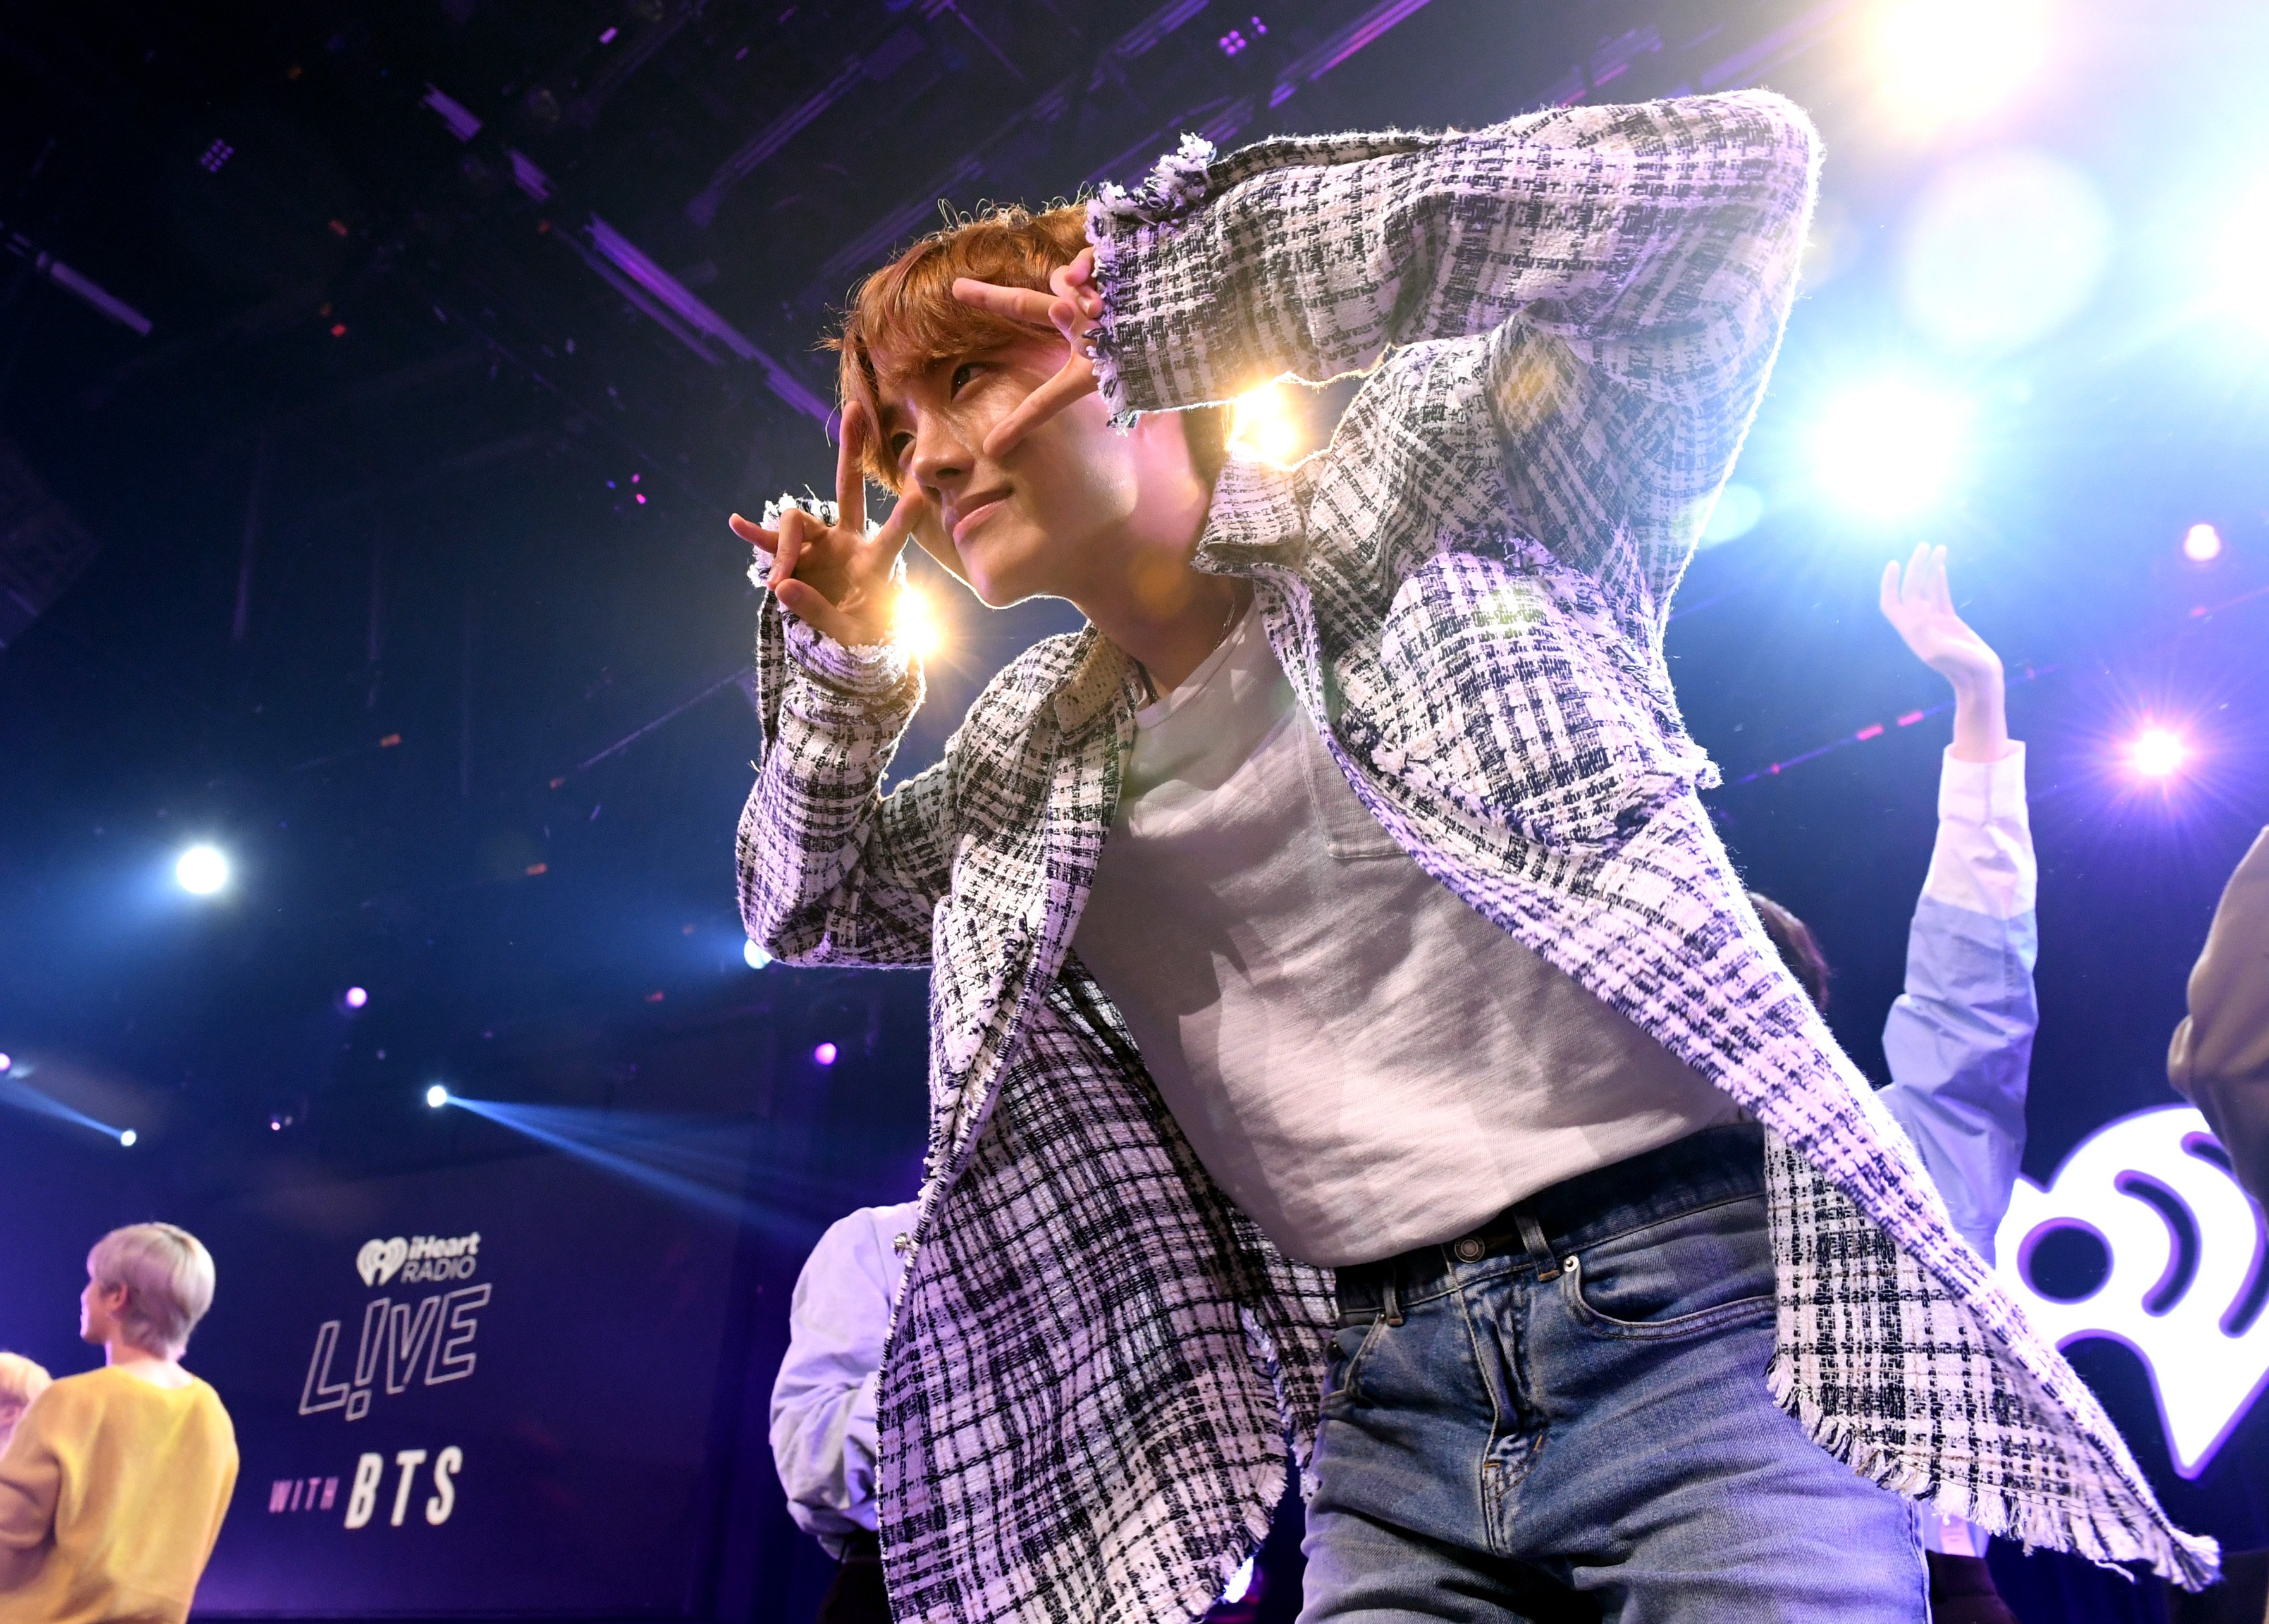 J-Hope of BTS on stage at iHeartRadio LIVE with BTS presented by HOT TOPIC at iHeartRadio Theater